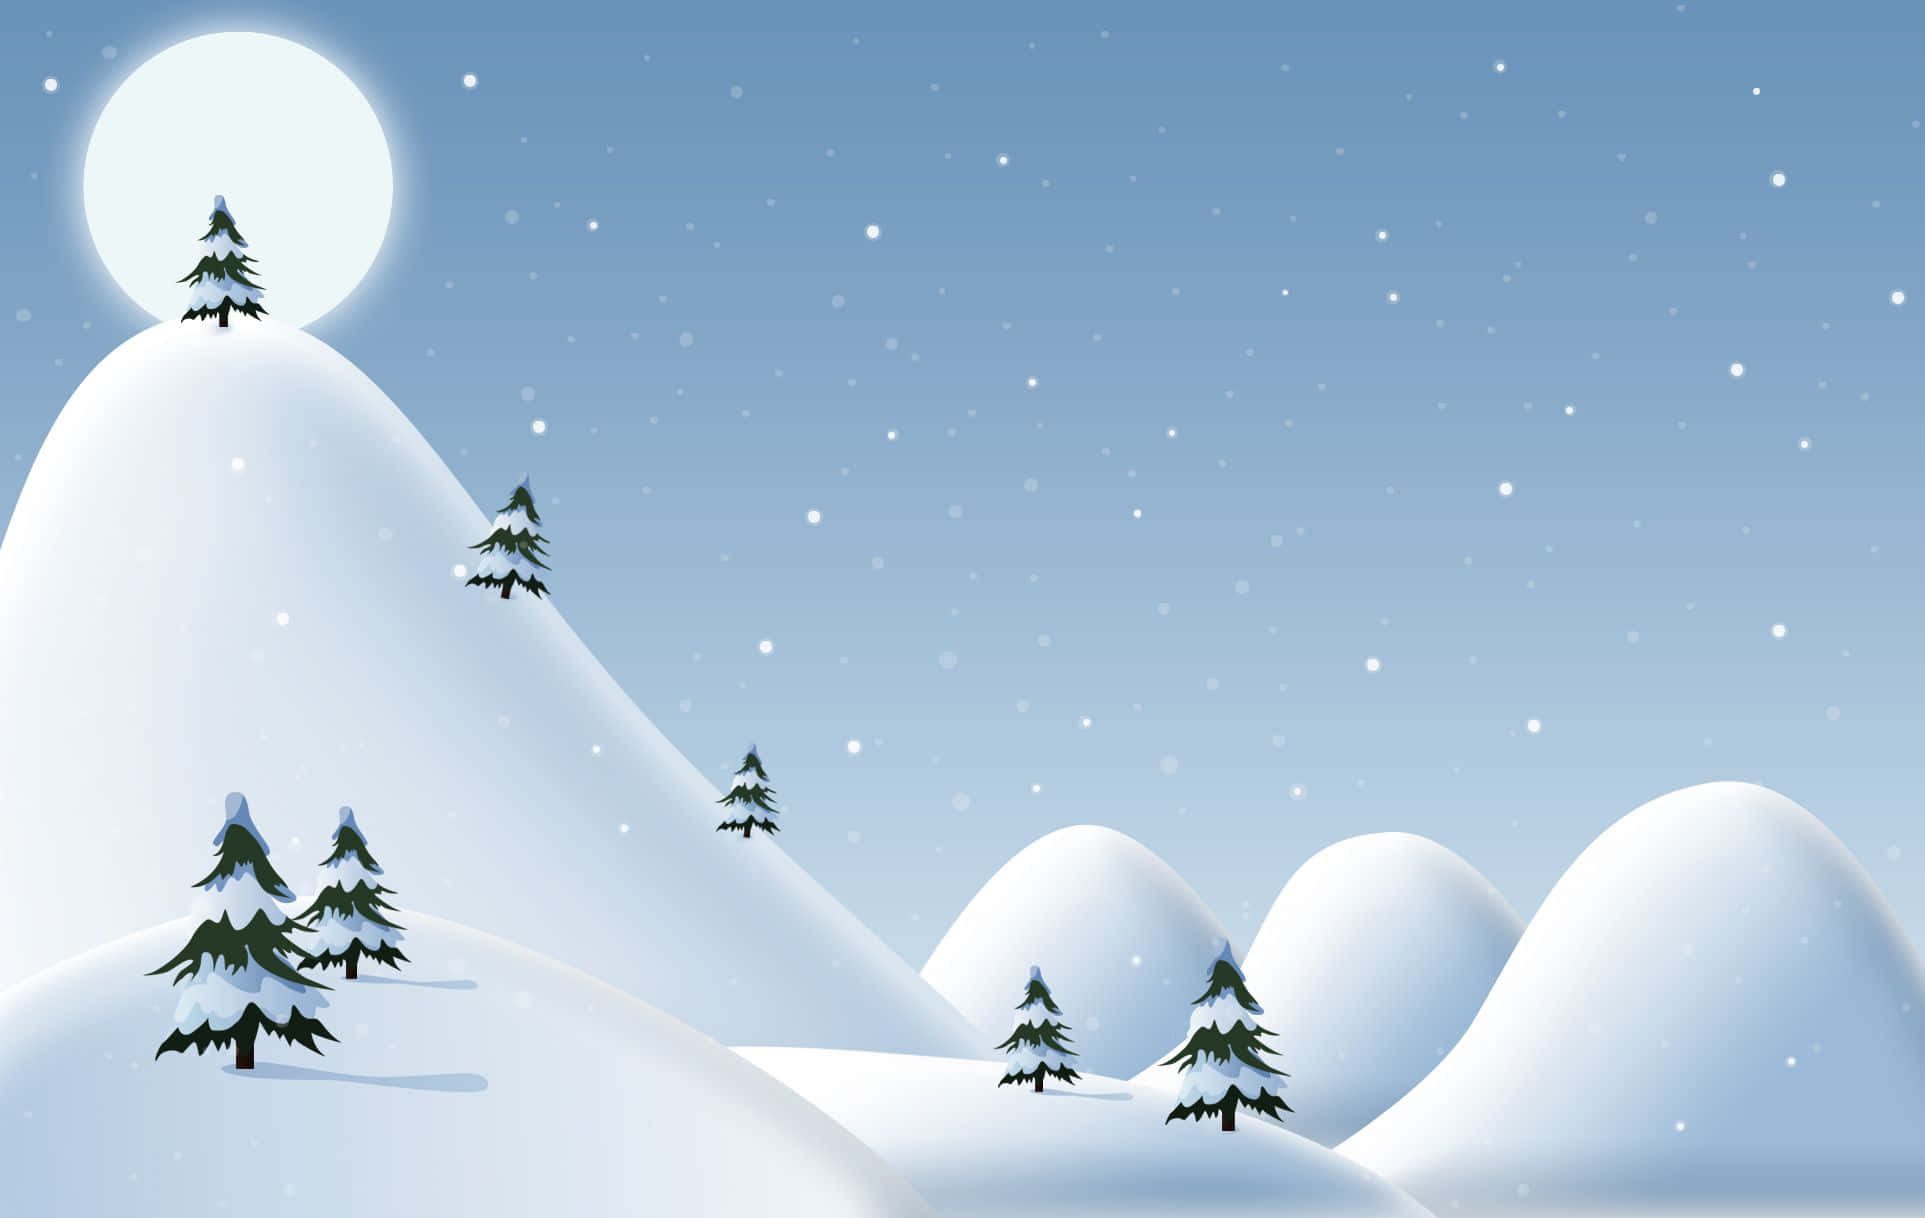 Celebrate the Christmas holiday in style with this fun and festive background!